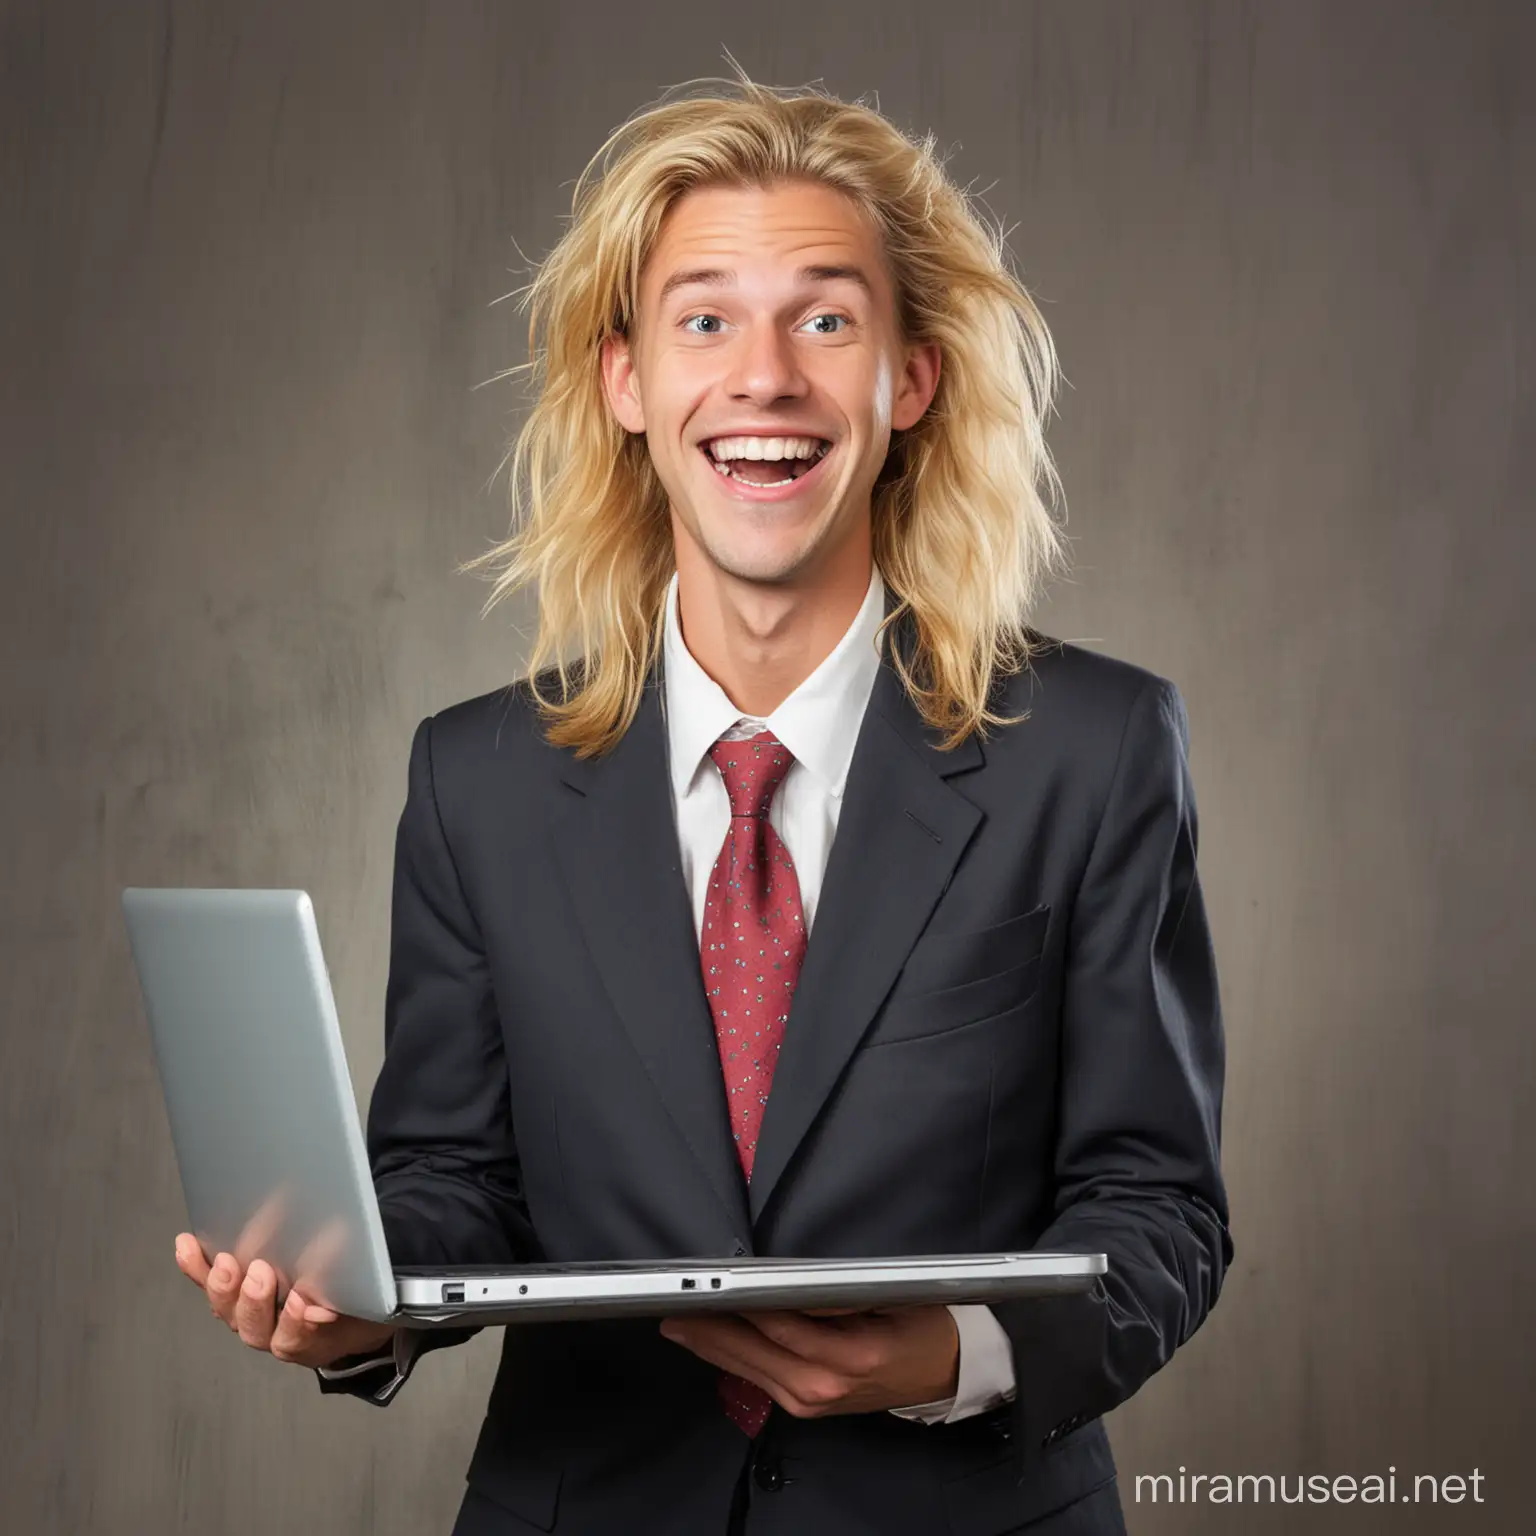 Quirky Hillbilly Businessman Smiling with Laptop